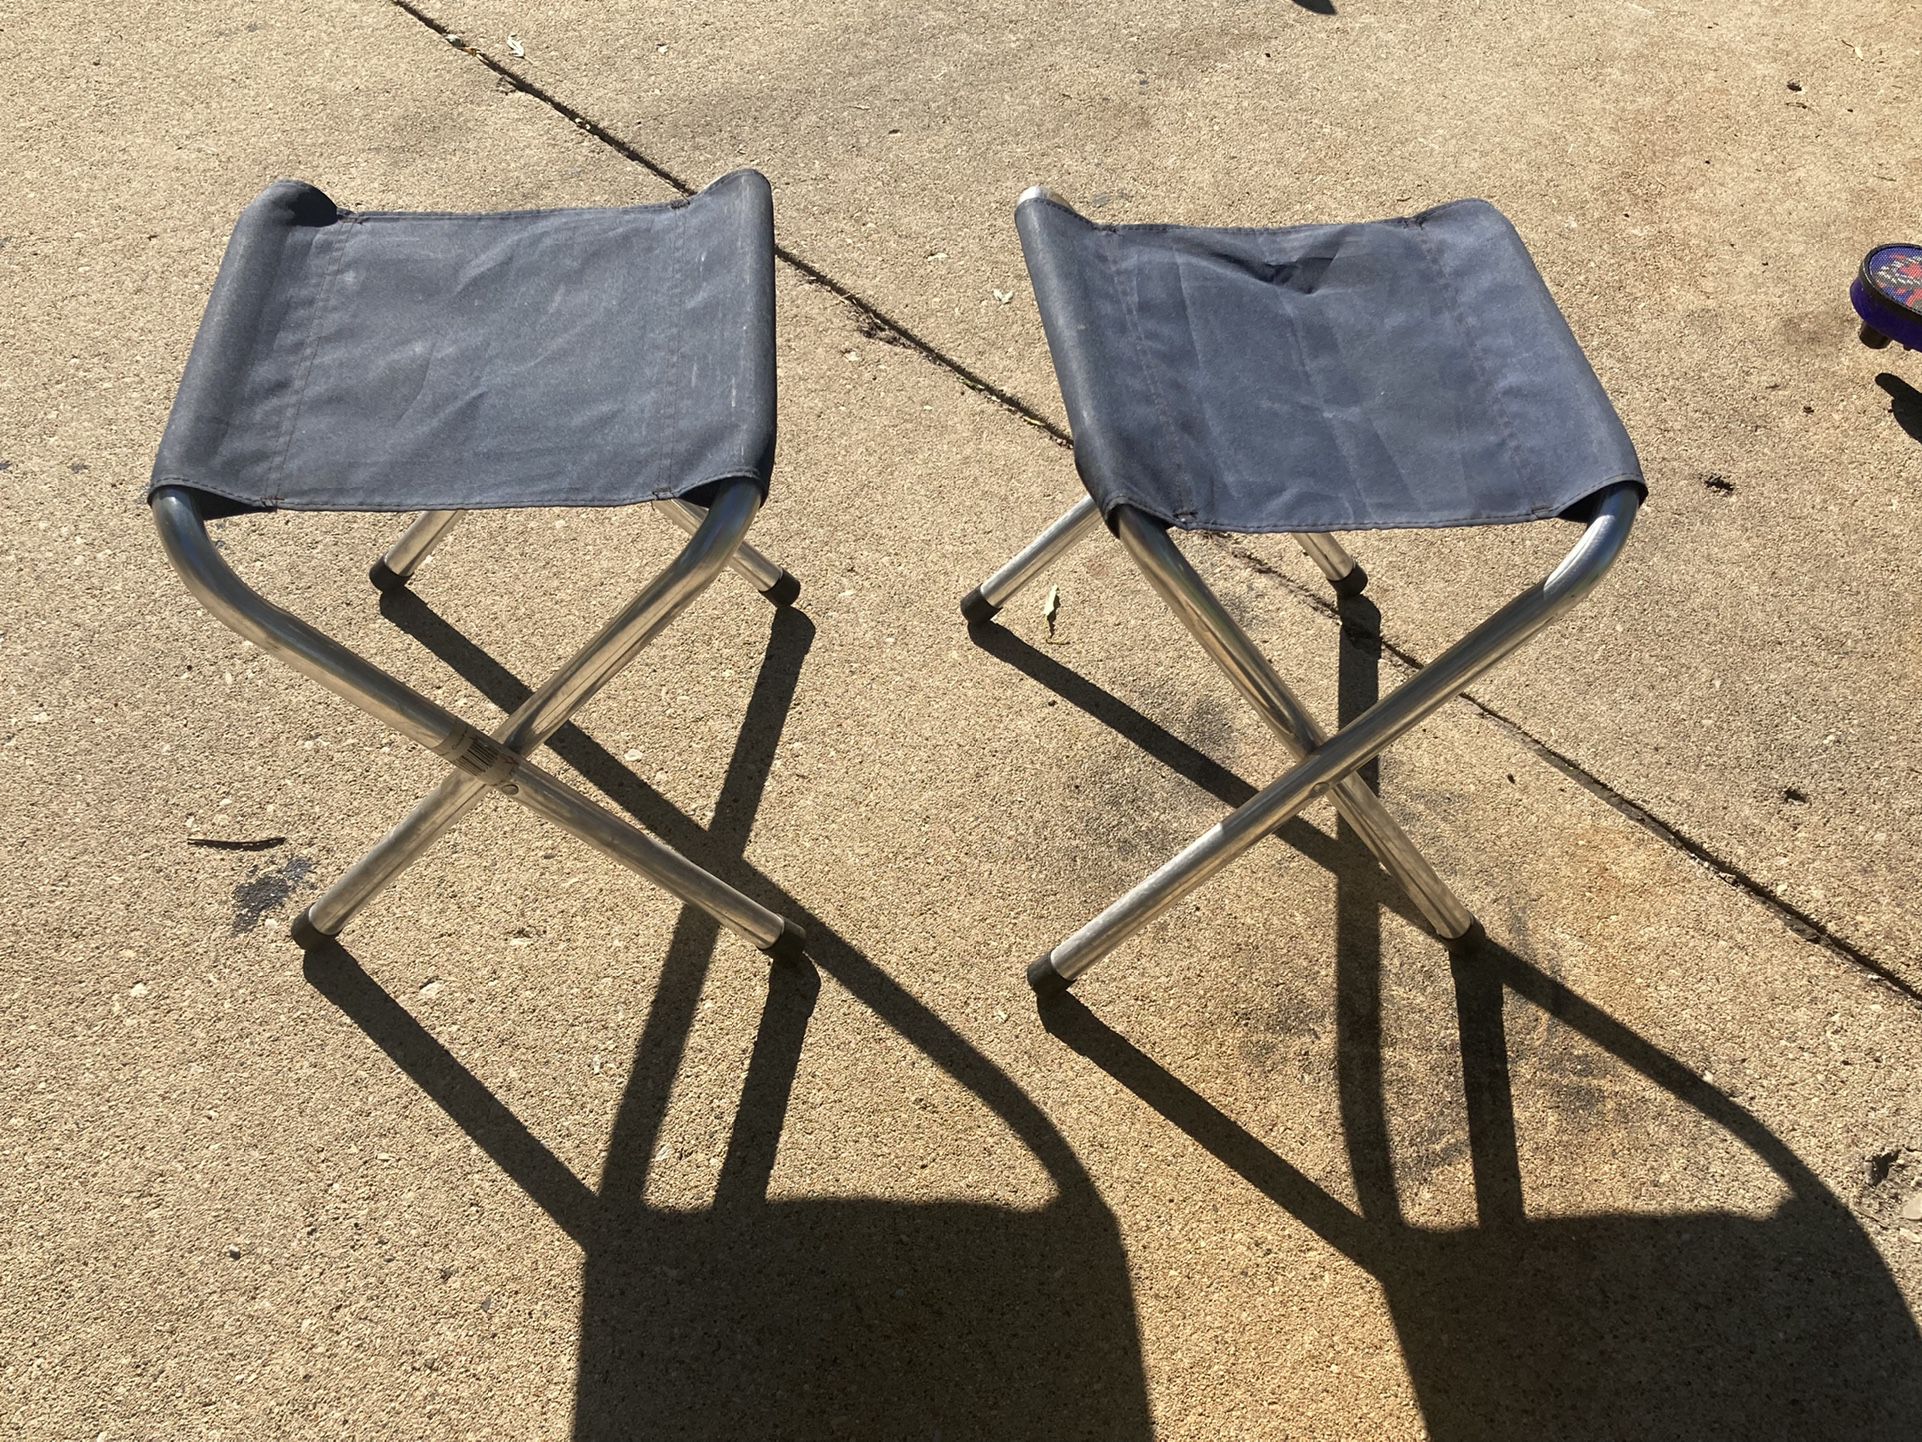 2 Small Coleman Folding Stools $15 For Both